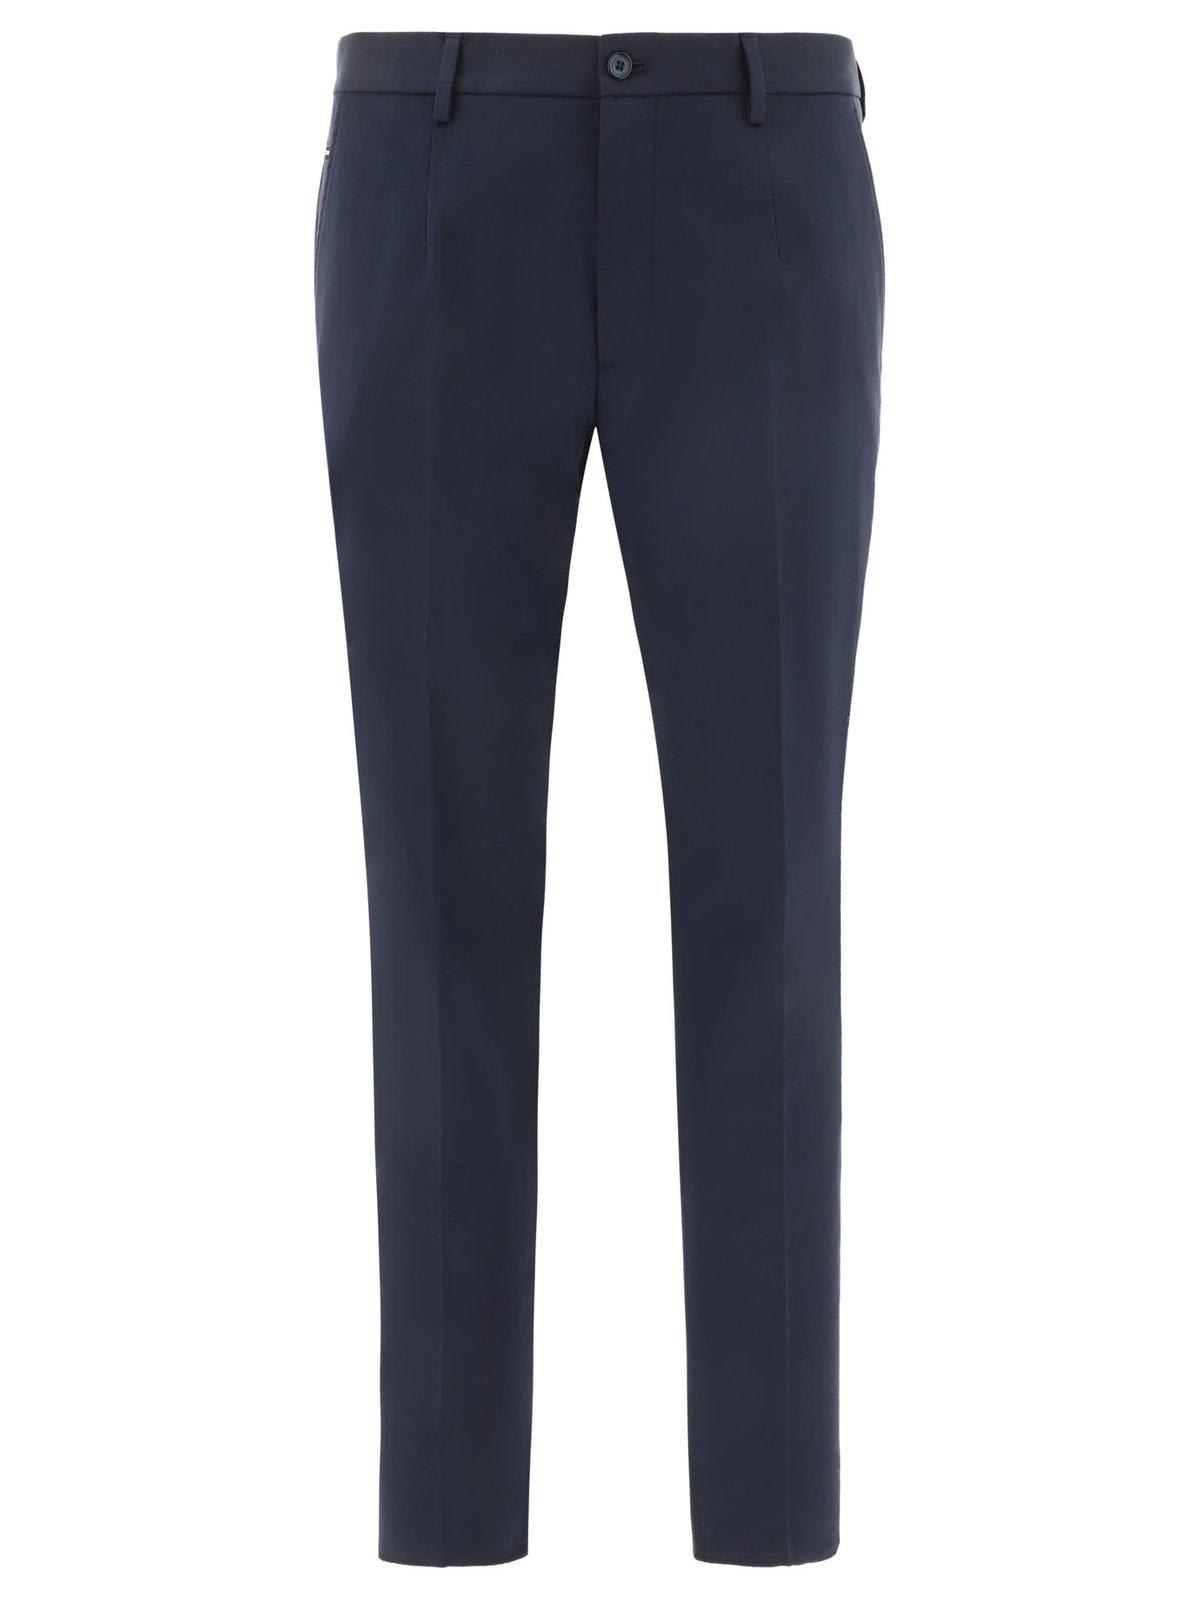 DOLCE & GABBANA LOGO PATCH TAILORED TROUSERS